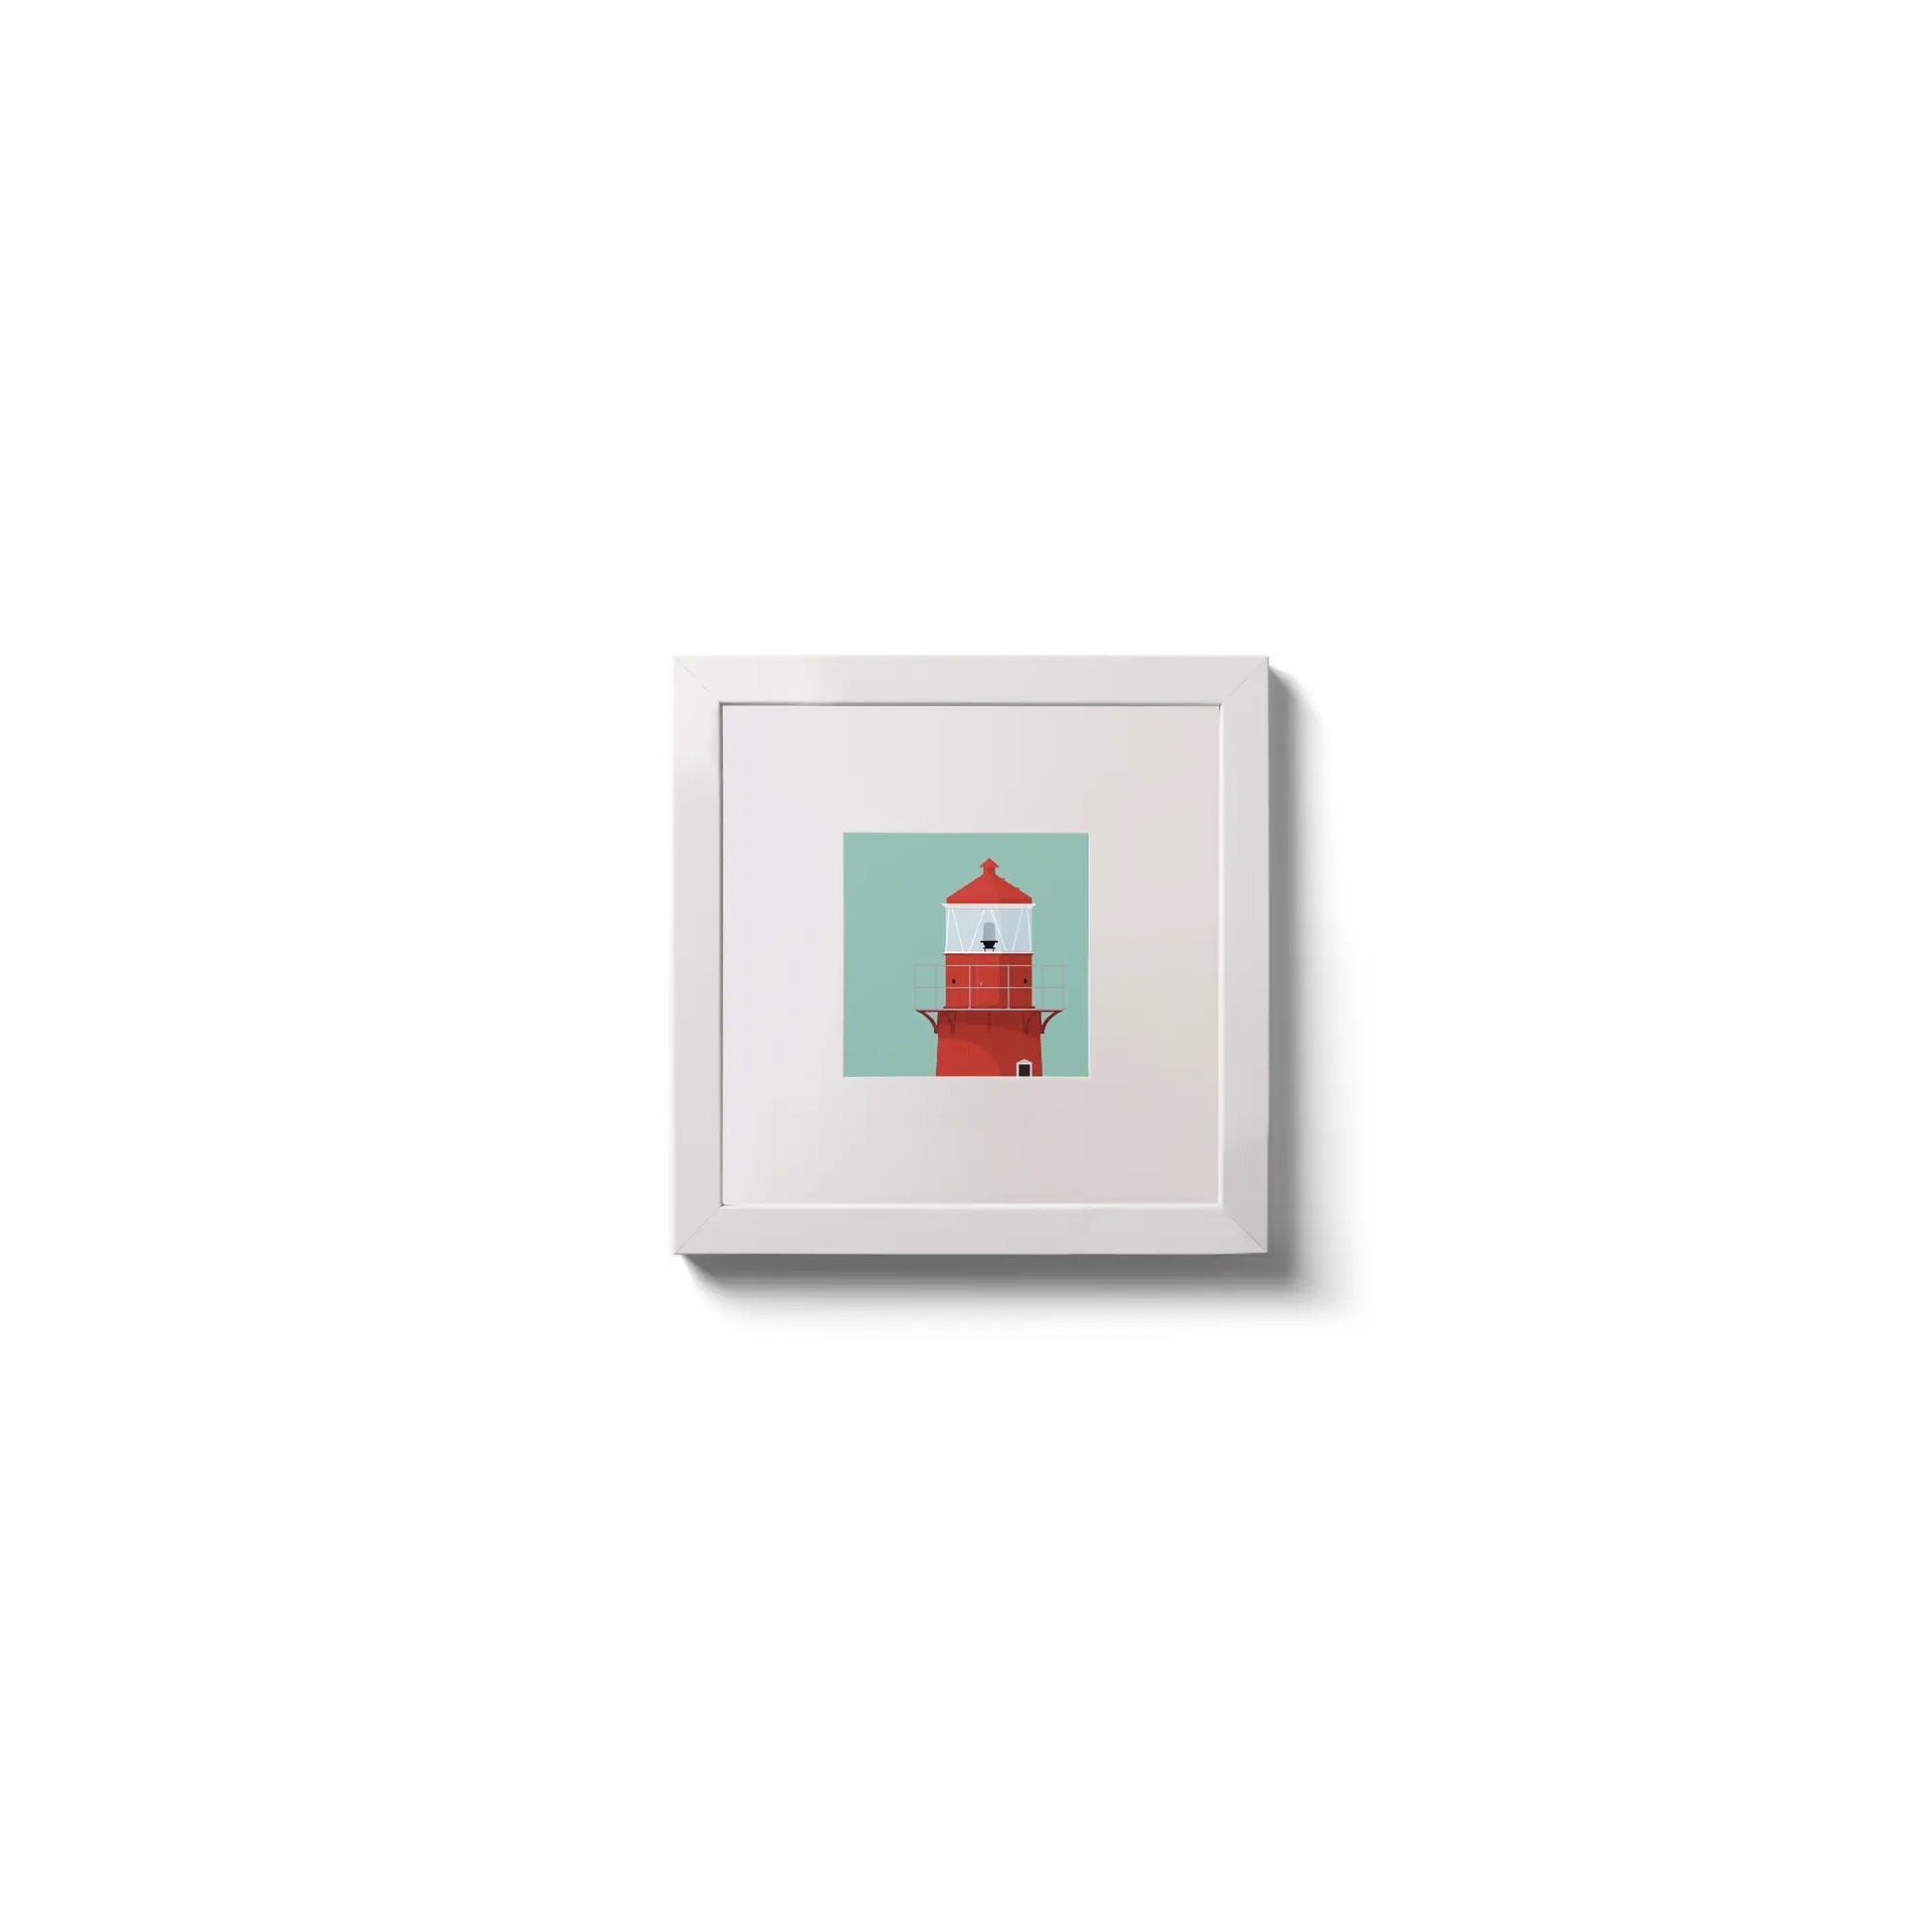 Illustration of Rosslare Harbour lighthouse on an ocean green background,  in a white square frame measuring 10x10cm.